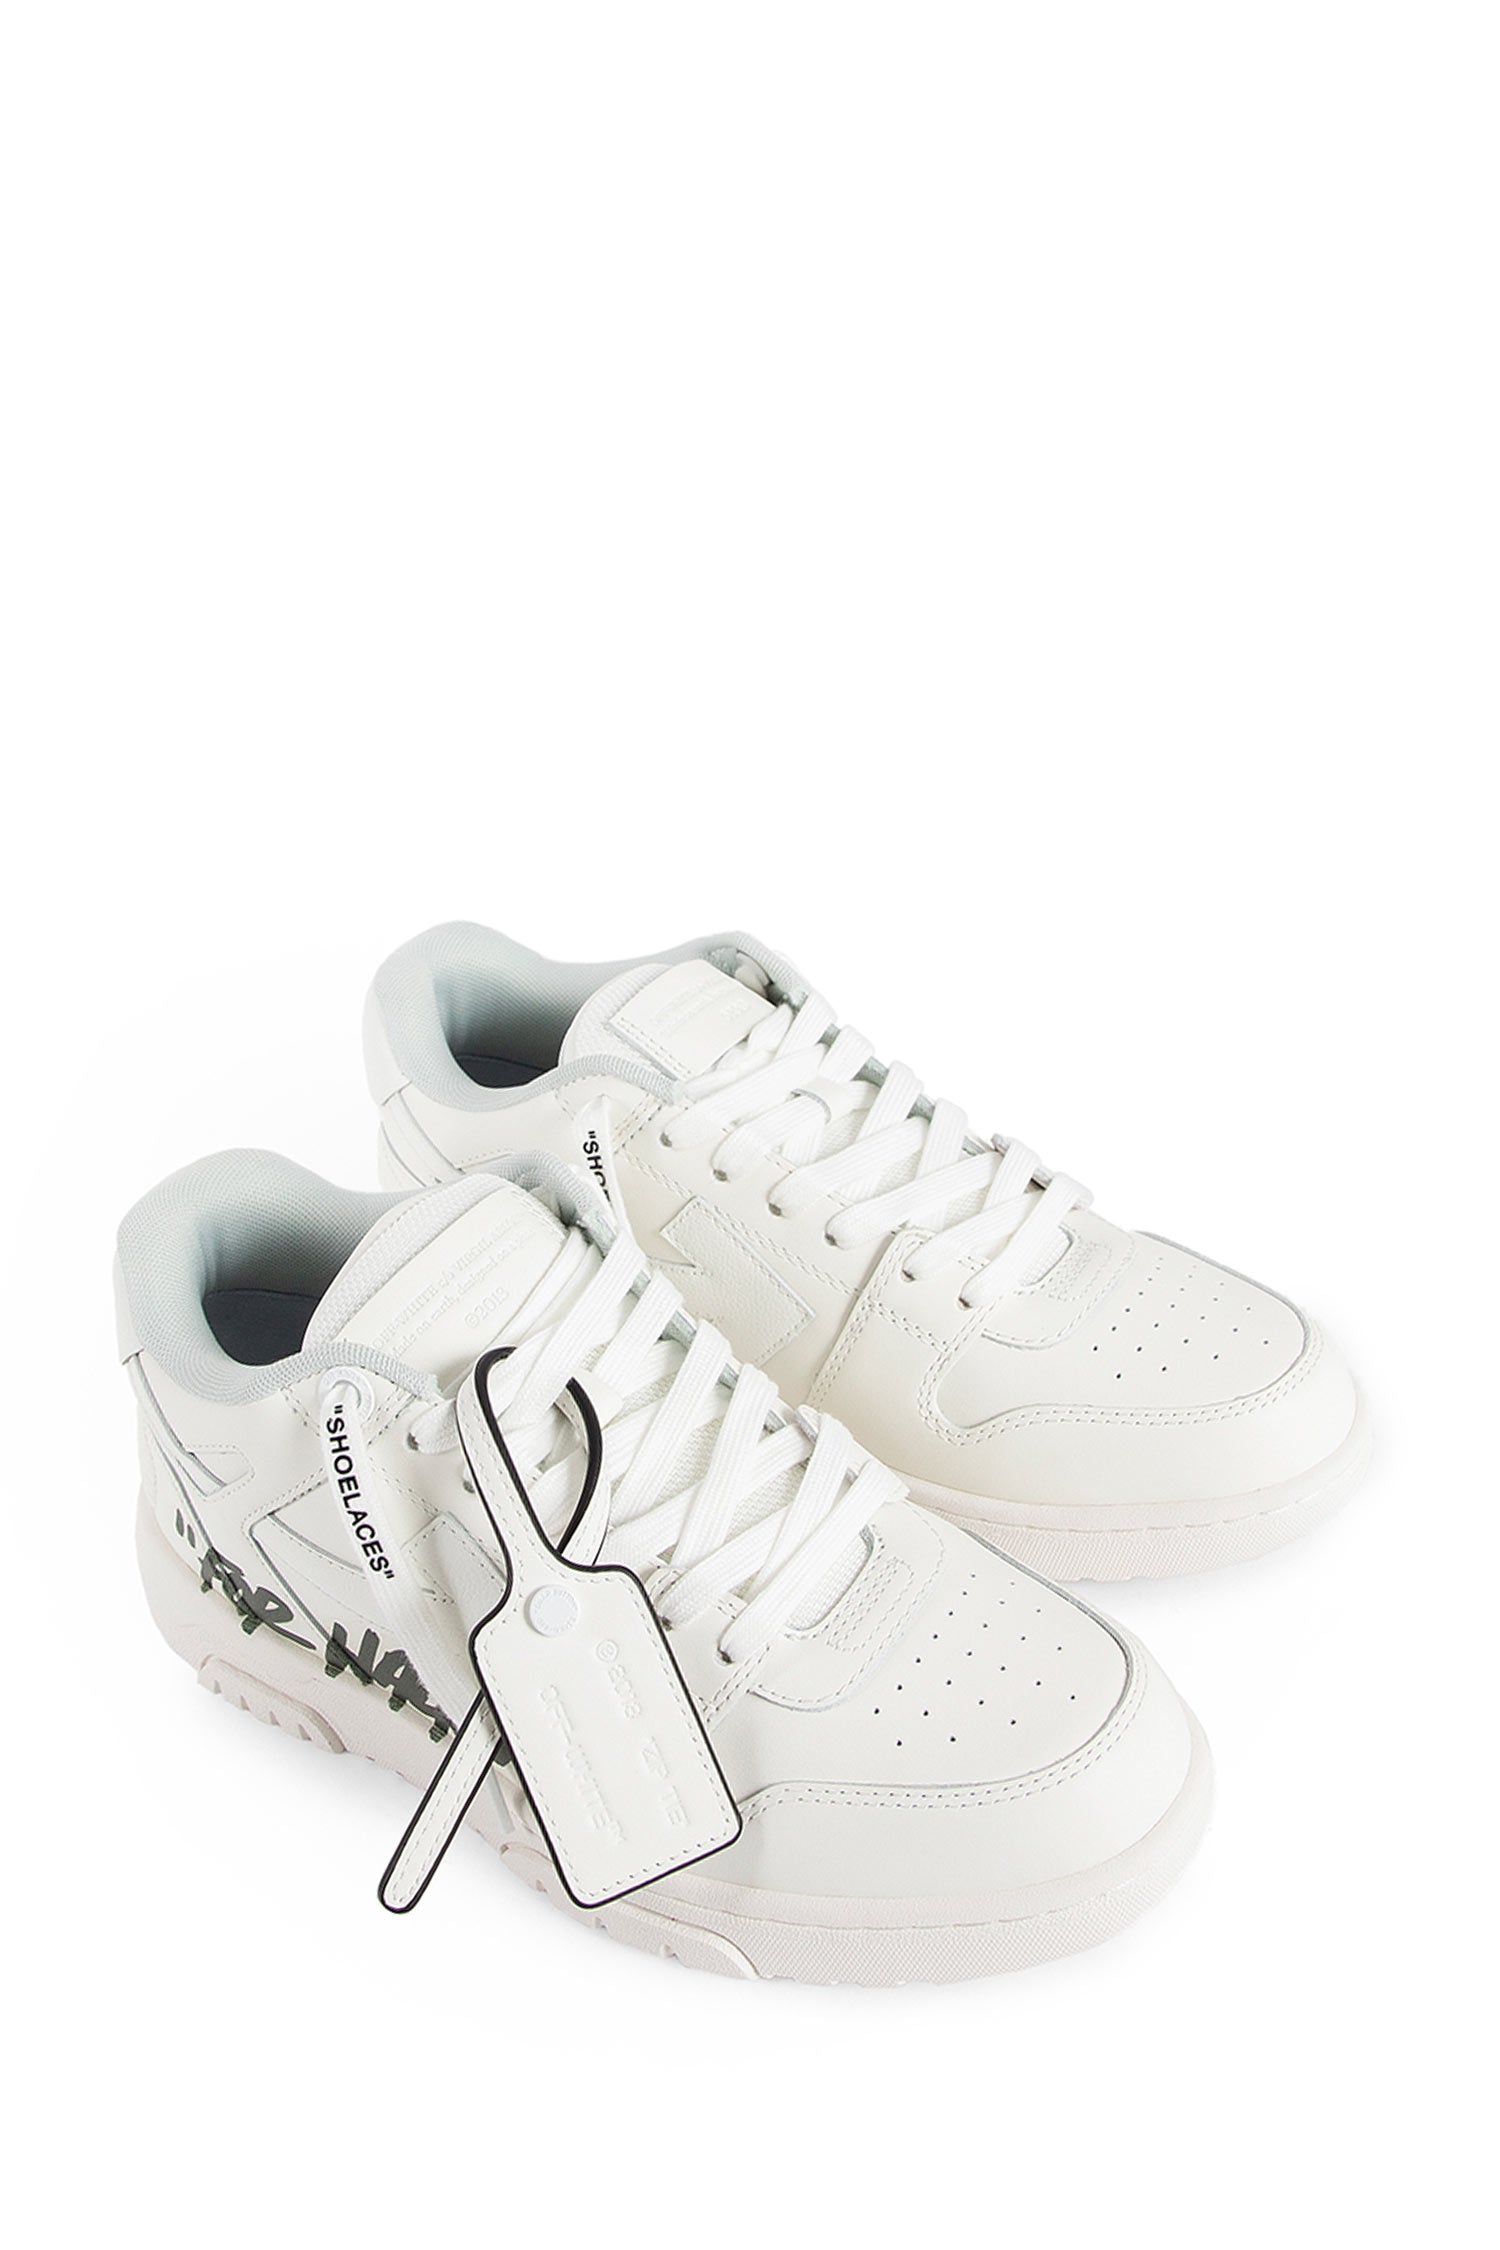 OFF-WHITE WOMAN  SNEAKERS